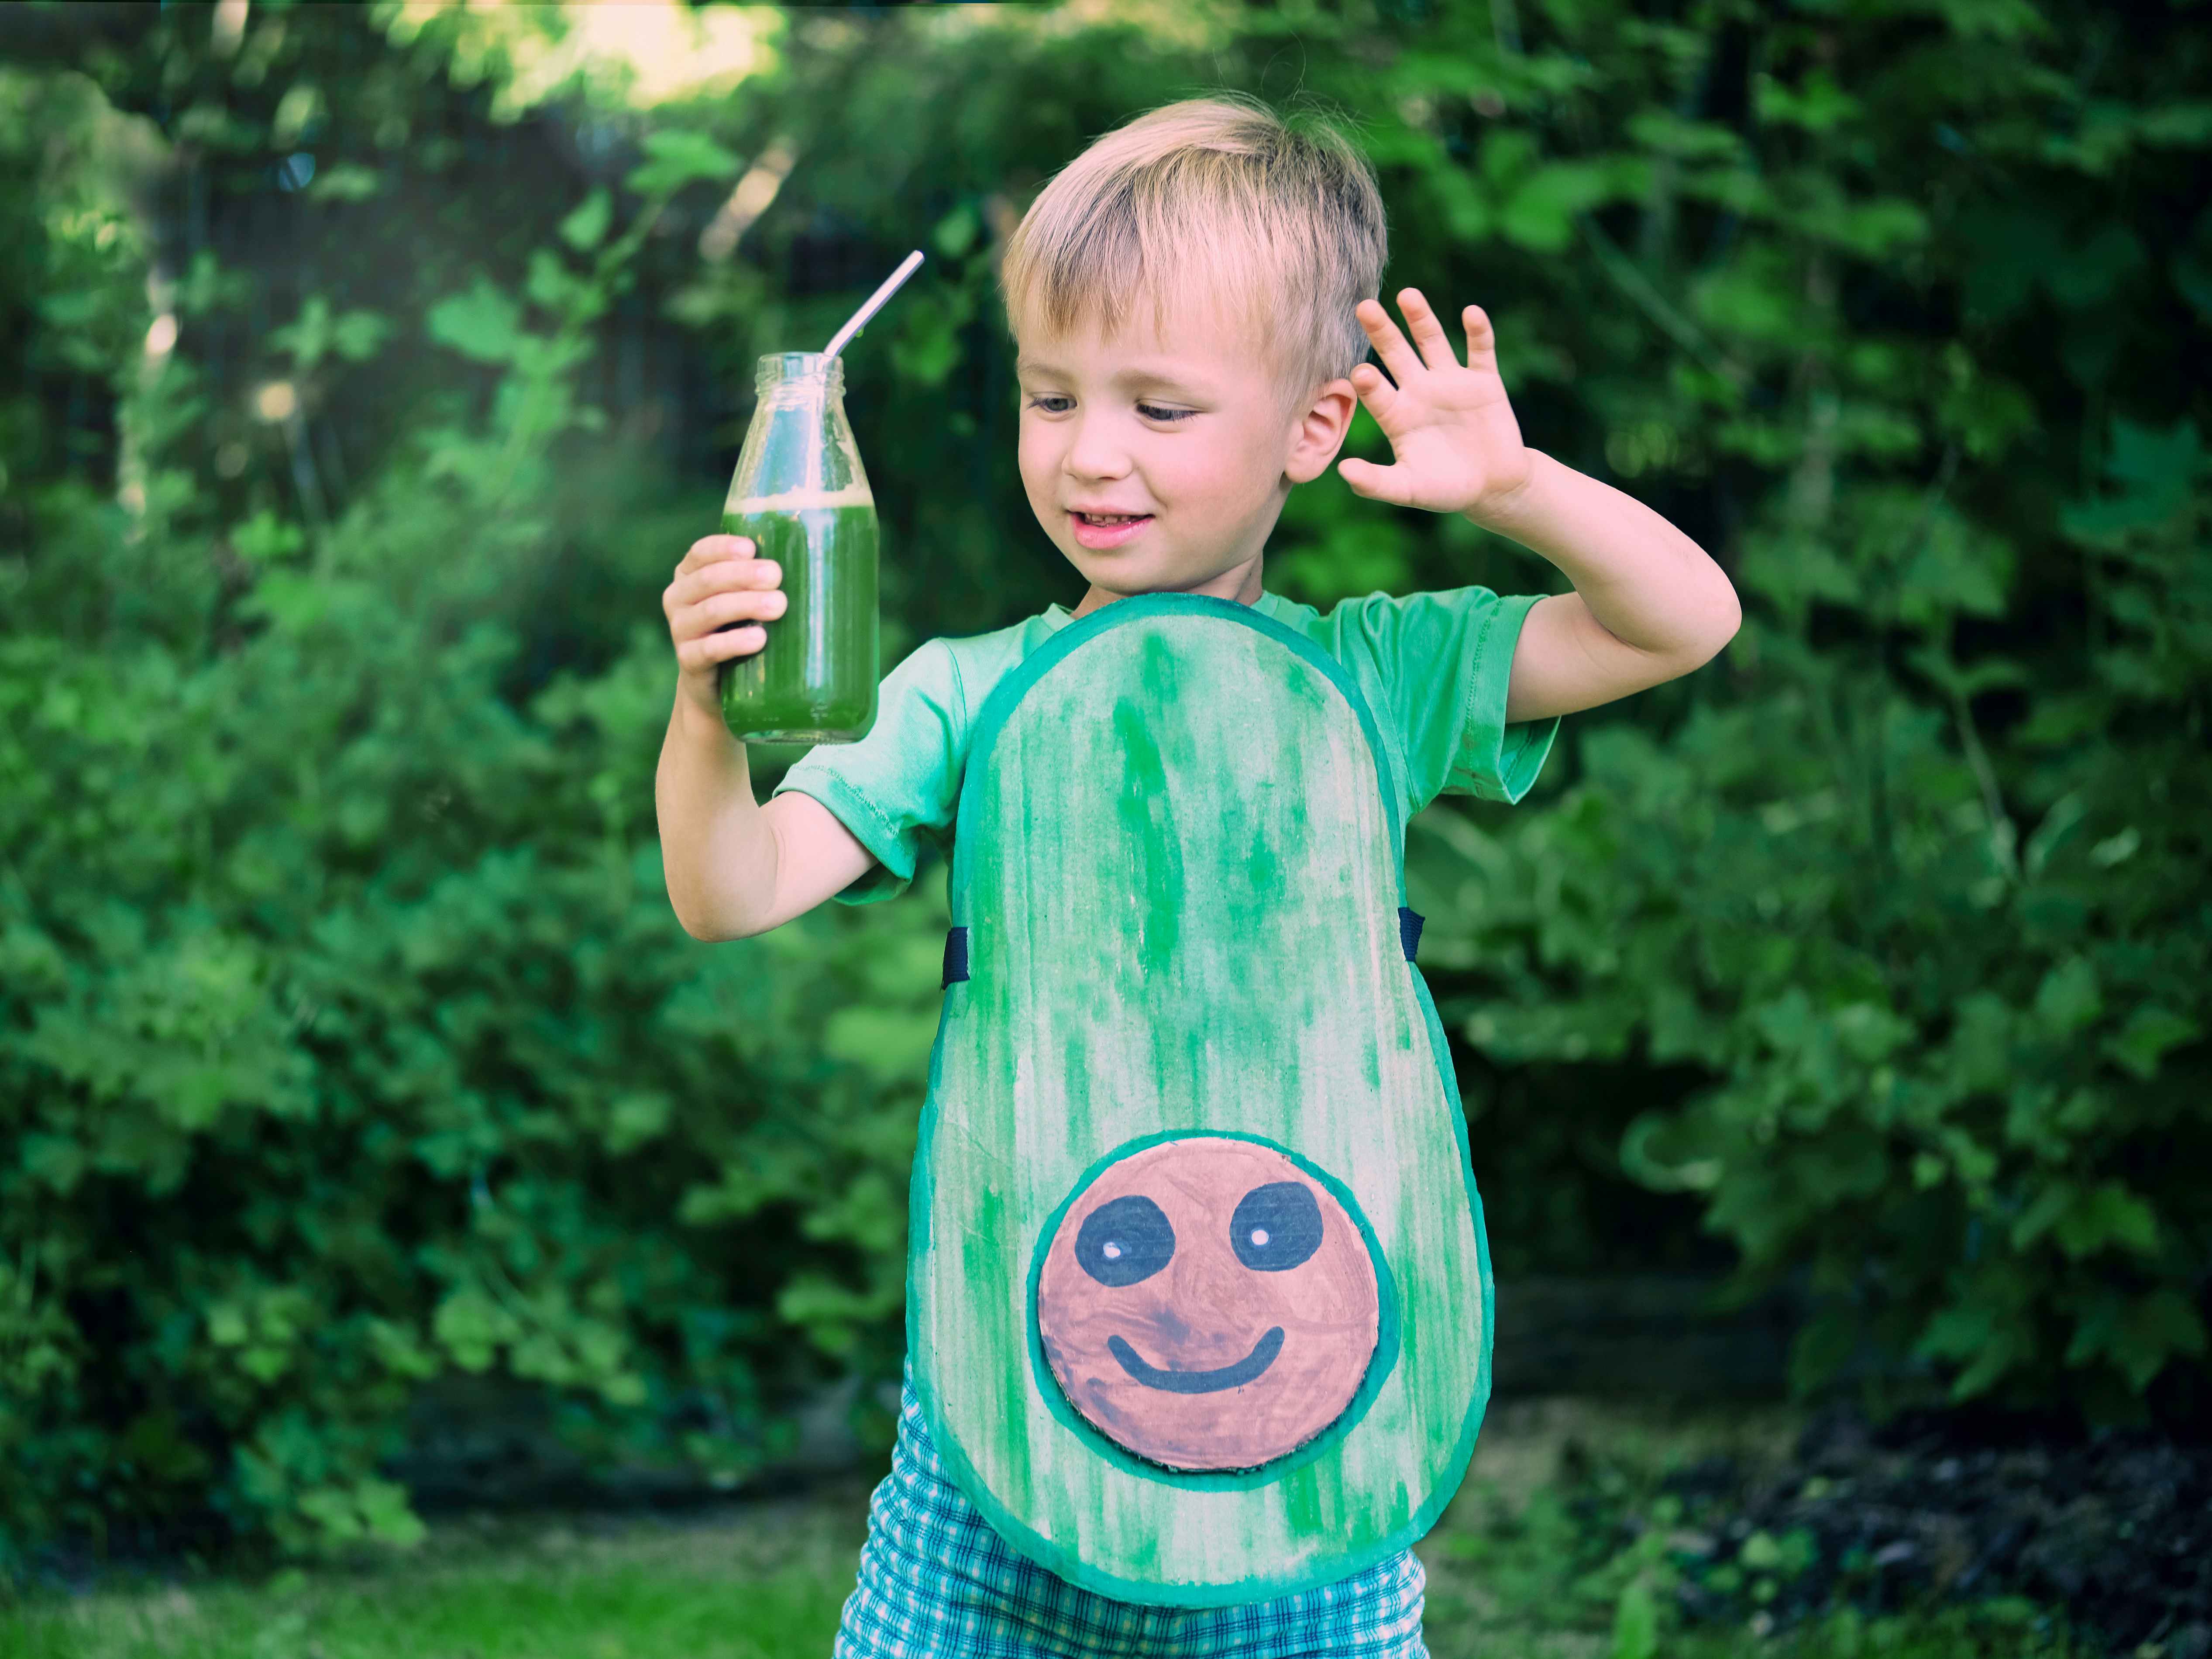 A child dressed up as aa avocado holding a drink with a bendy straw in it.